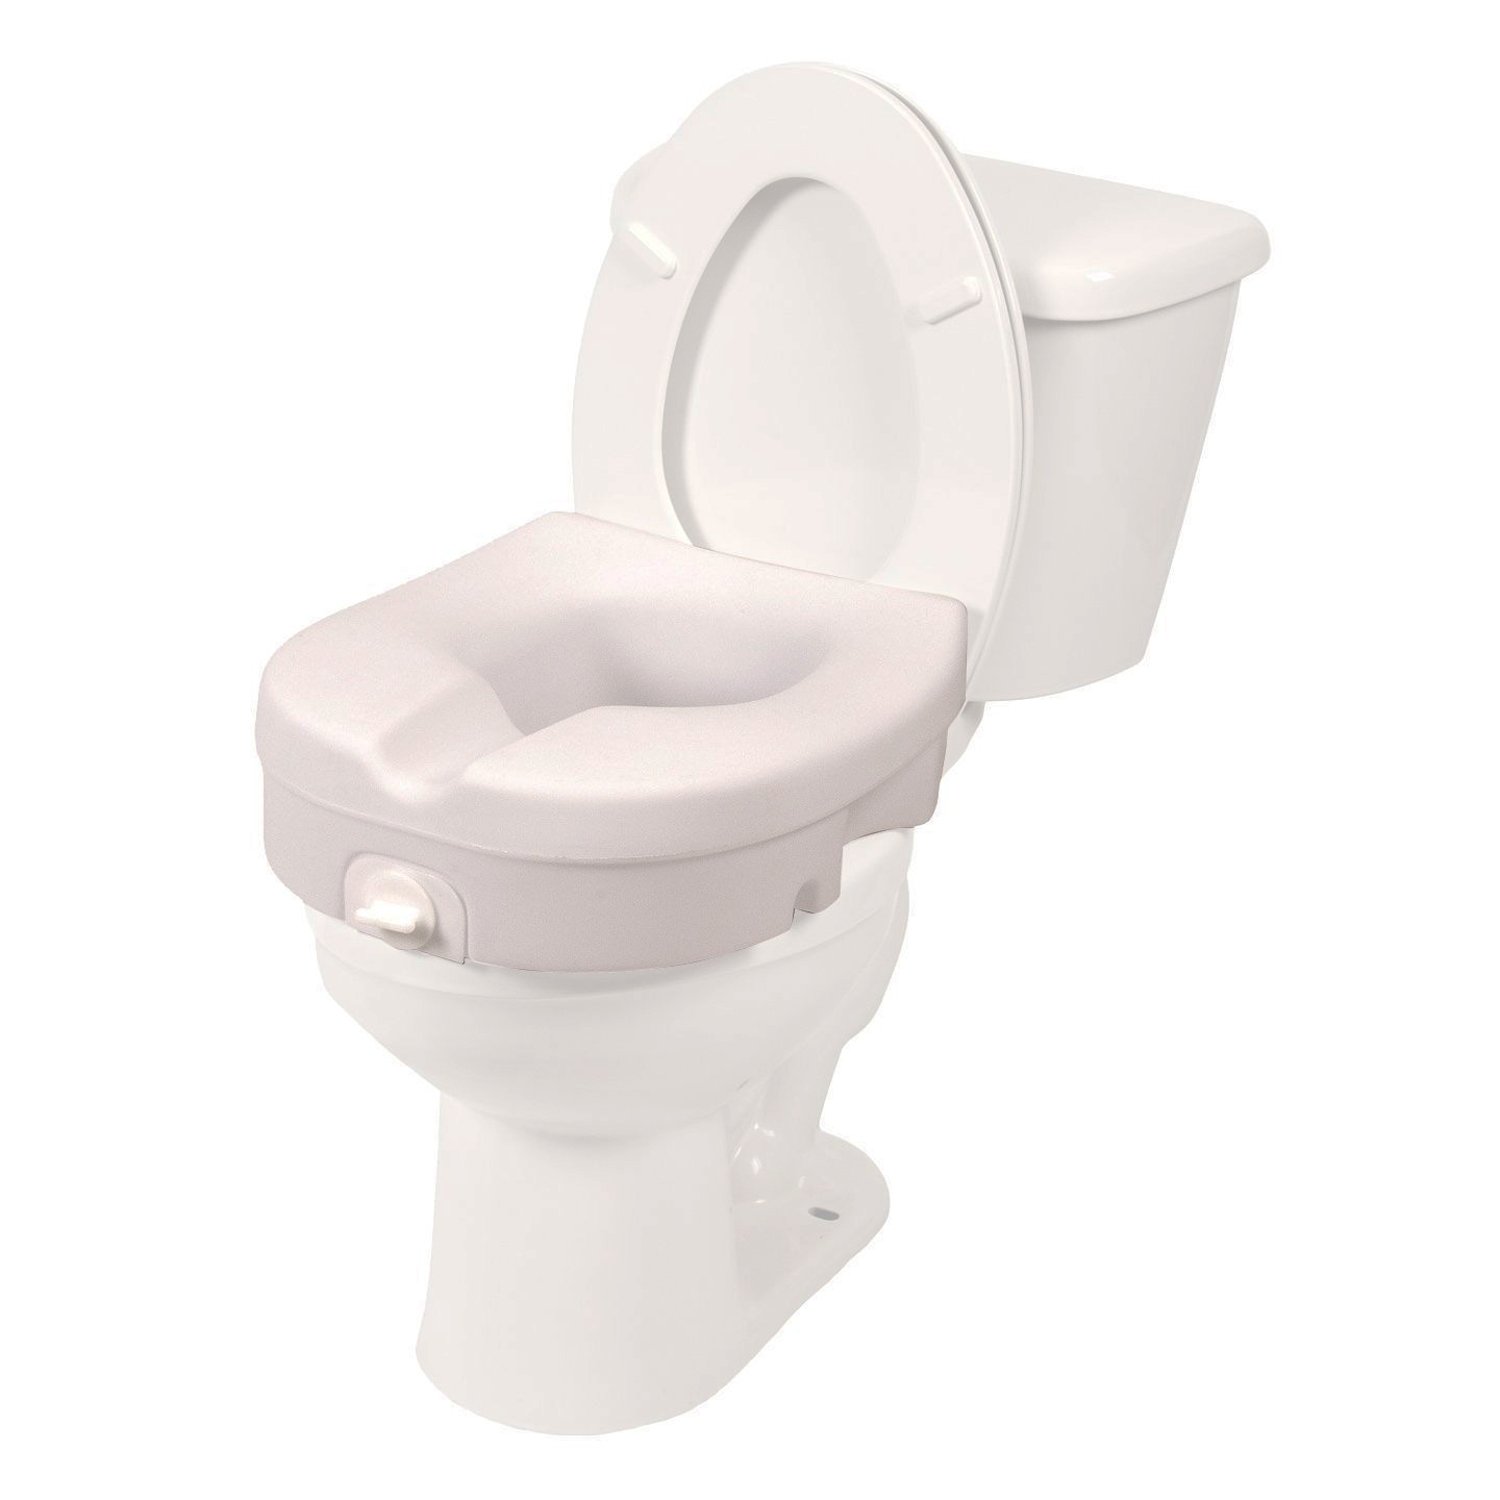 PCP Molded Toilet Seat Riser With Tightening Lock, White ...